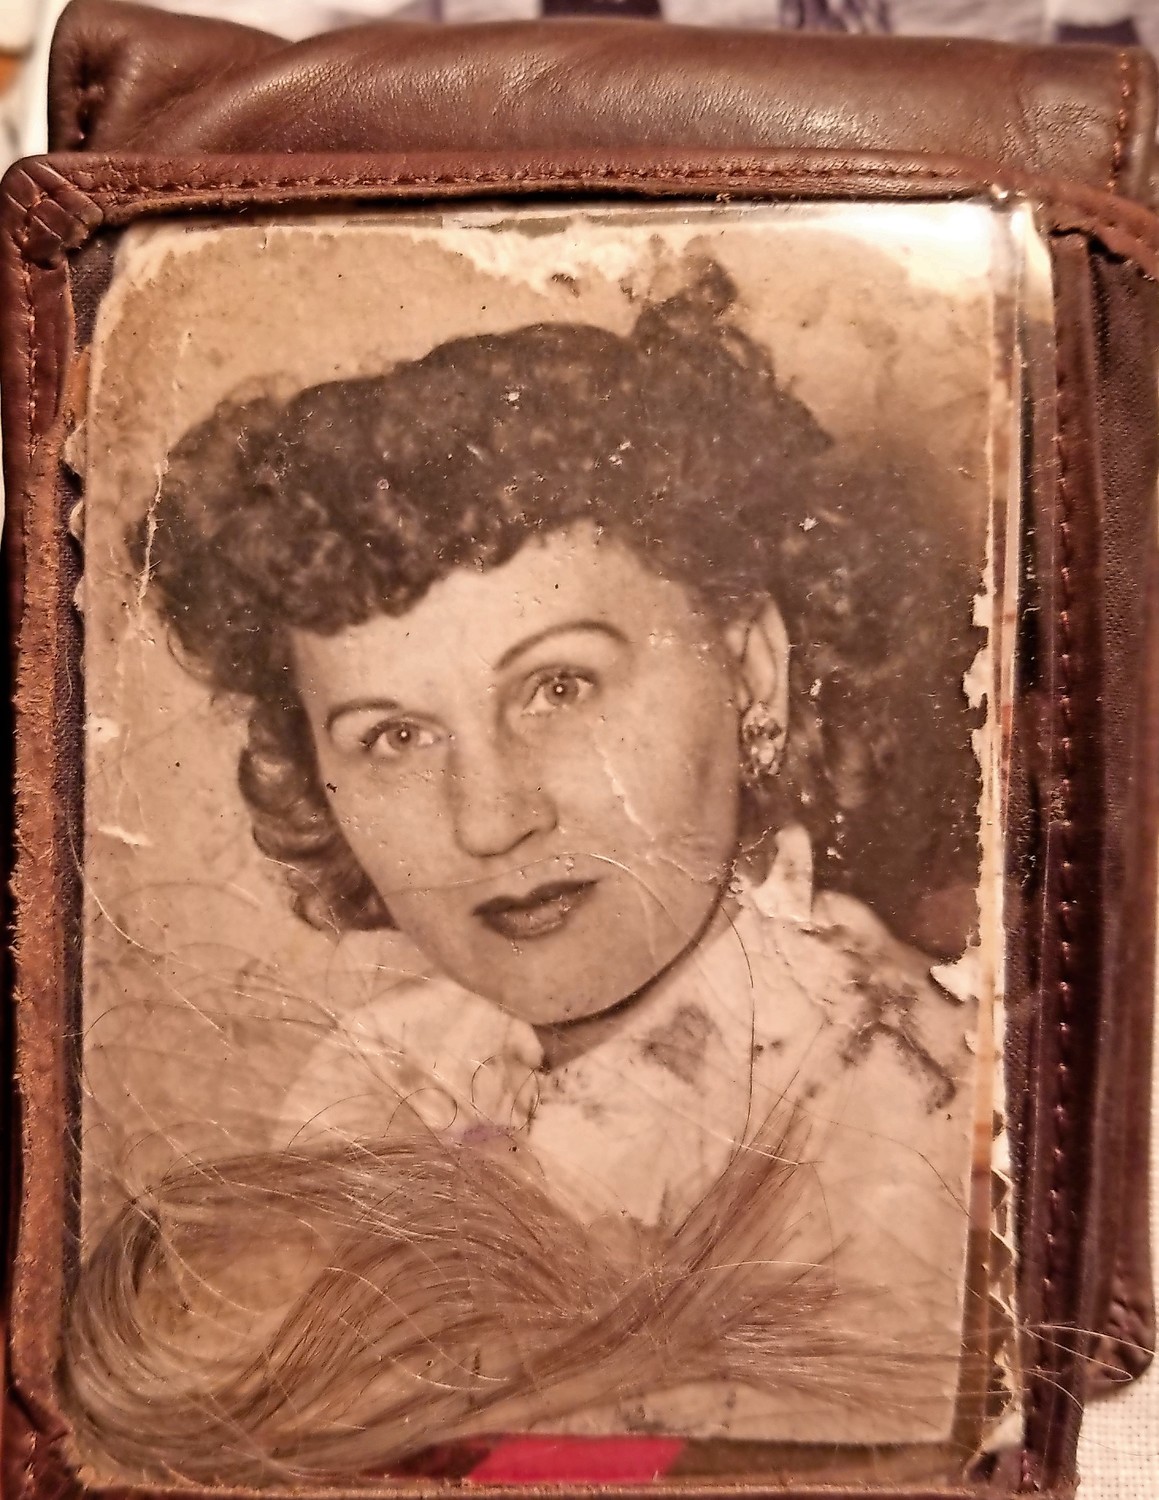 Charlie Franza keeps a photo he took of his late wife, Nettie, in a wallet showcased in his room. He slipped a lock of her hair in the pocket, he said.